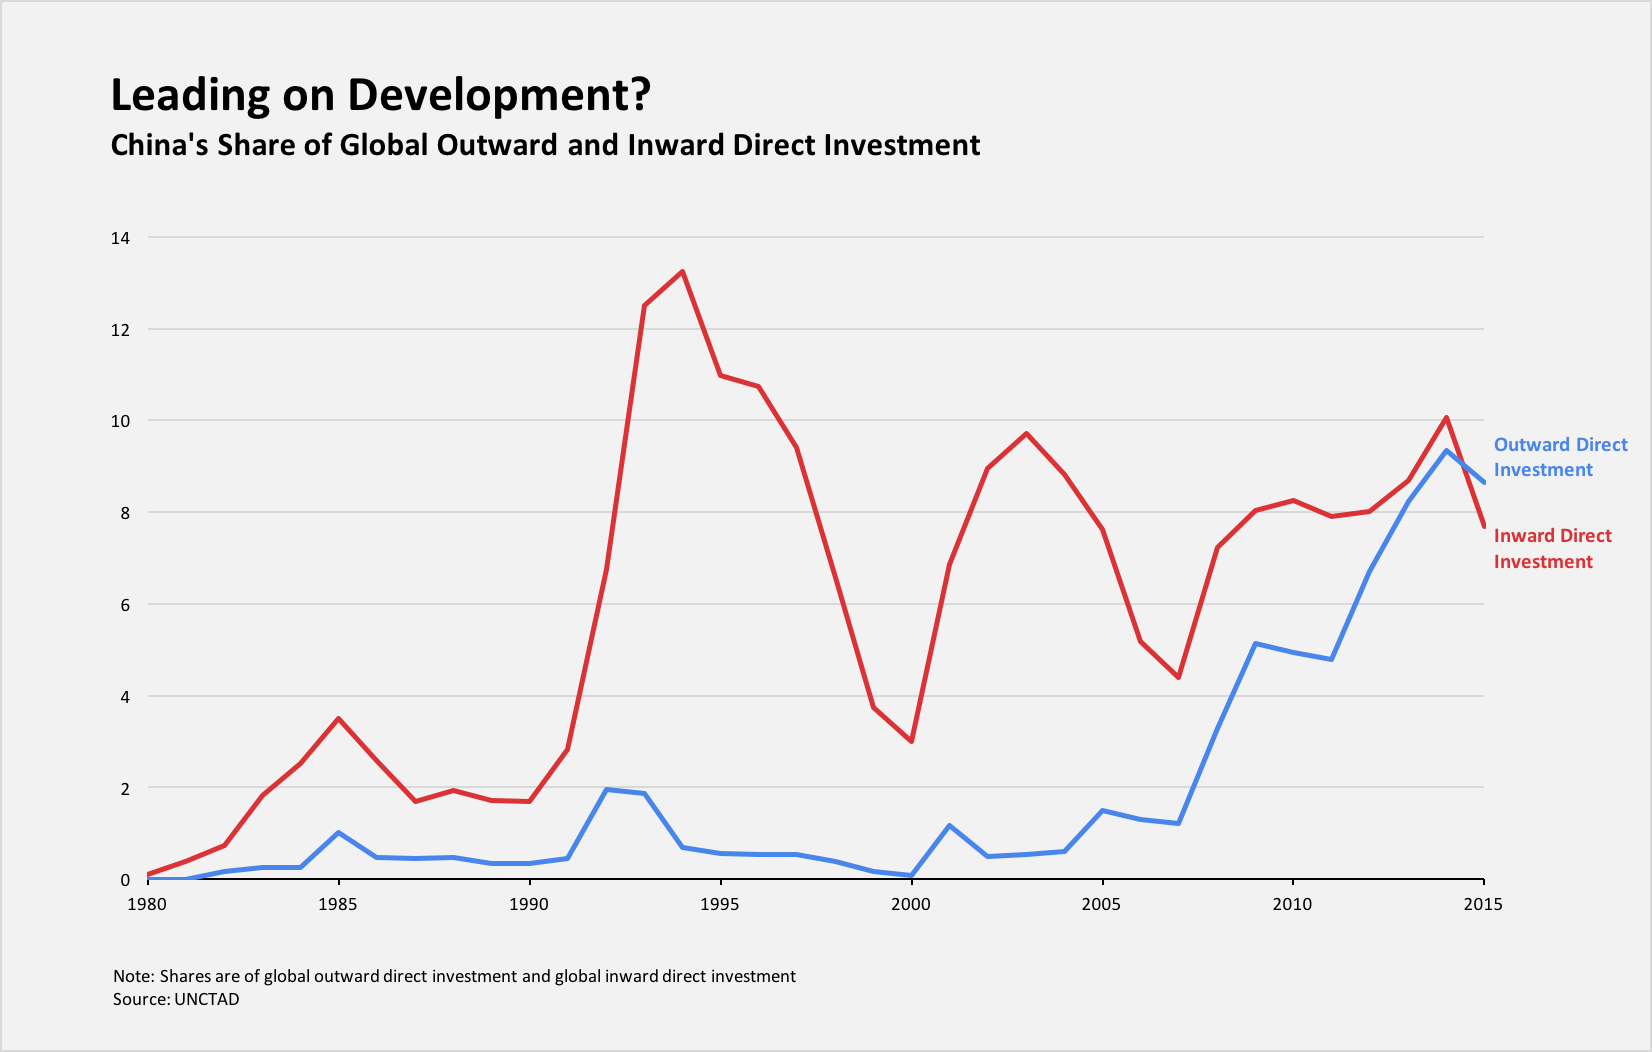 Outward and Inward Direct Investment for China